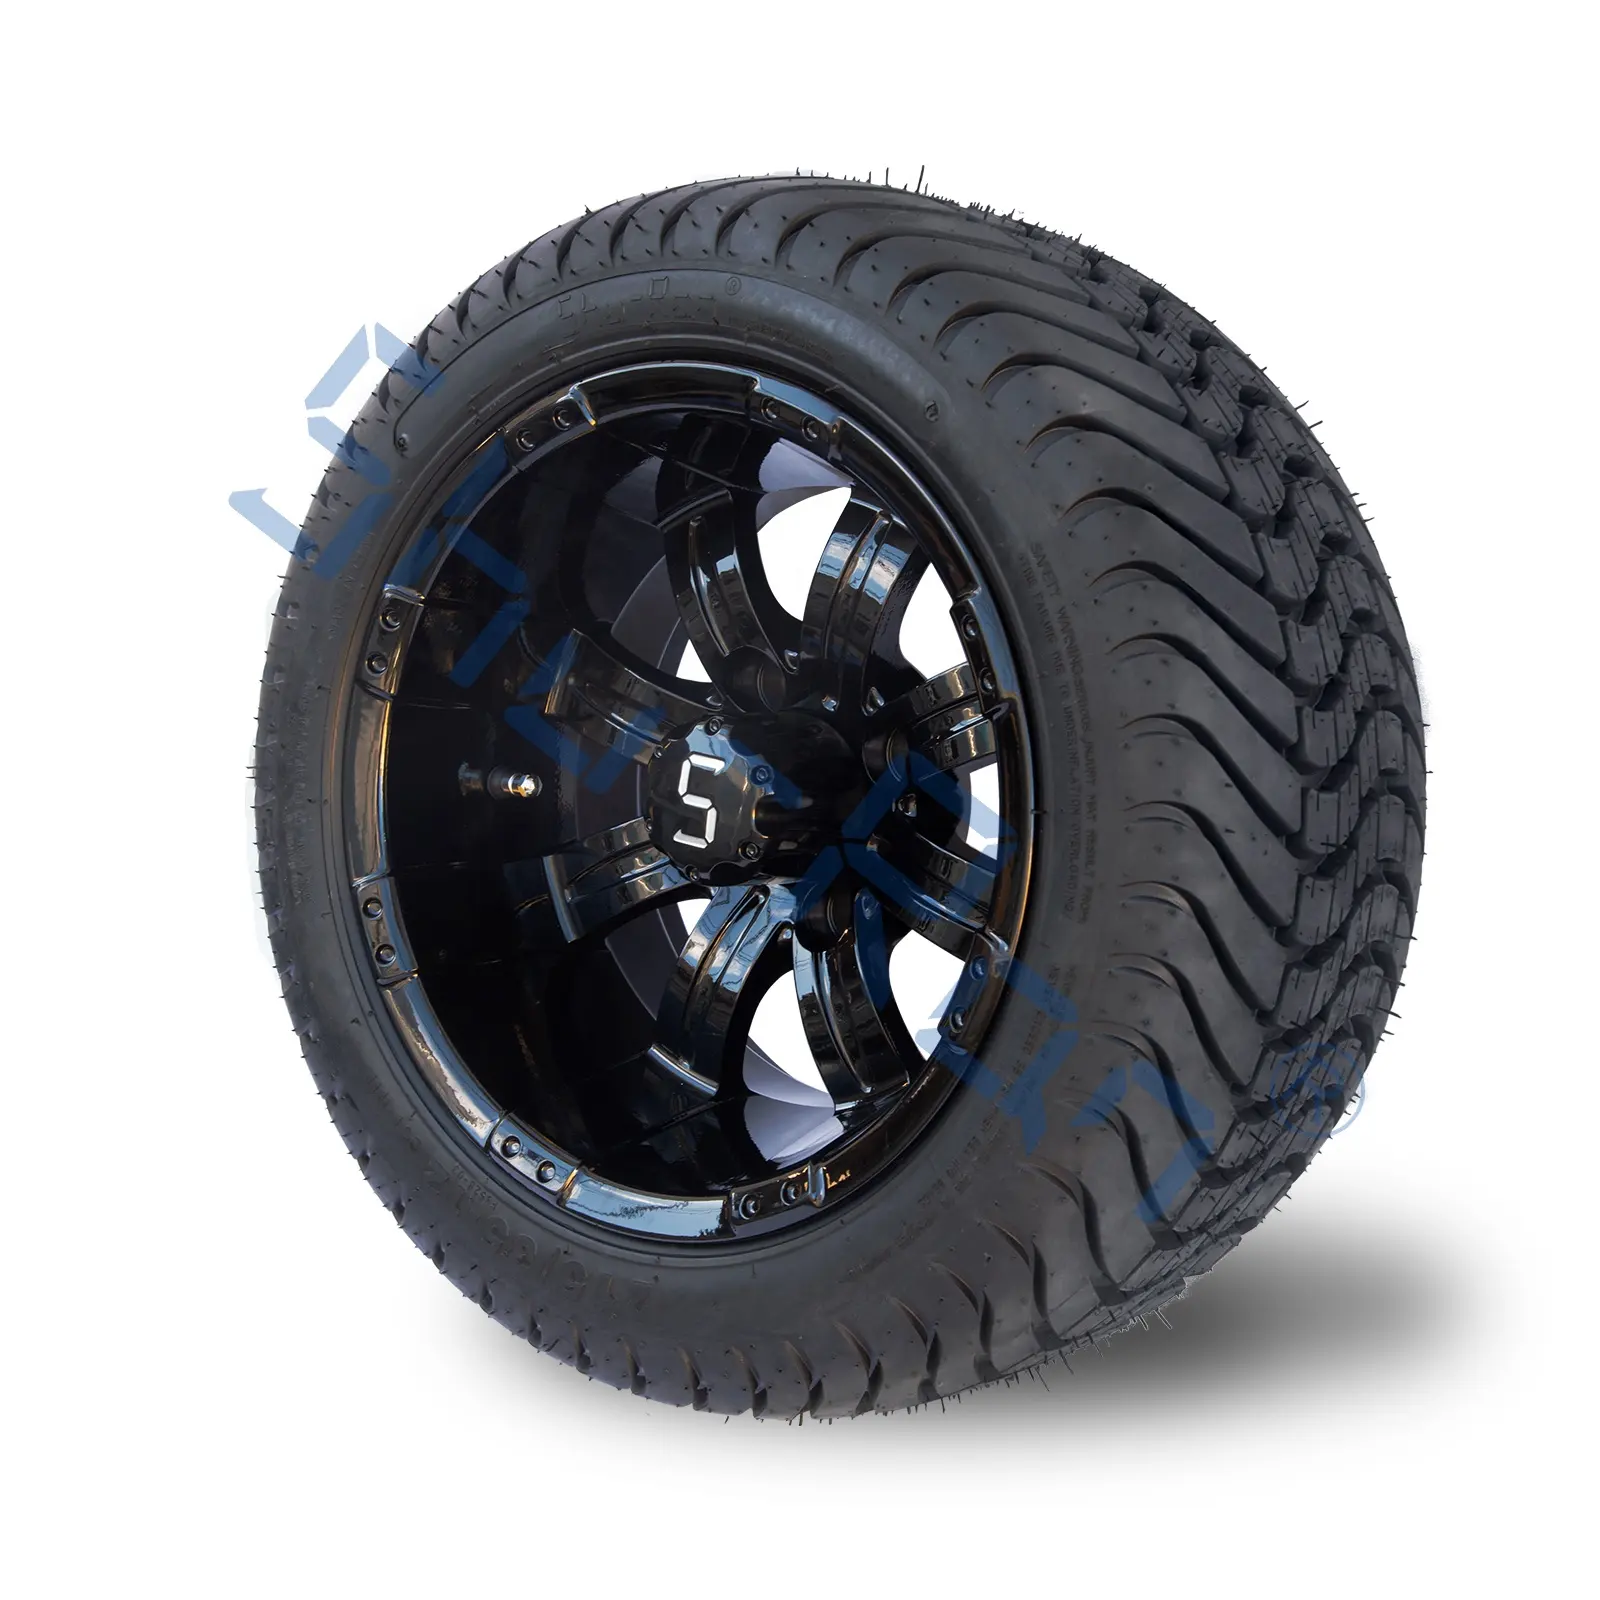 Golf Cart 12 Inch Gloss Black Wheels and 215/35-12 Low Profile DOT Tyres for Club Car, EZGO, YMH